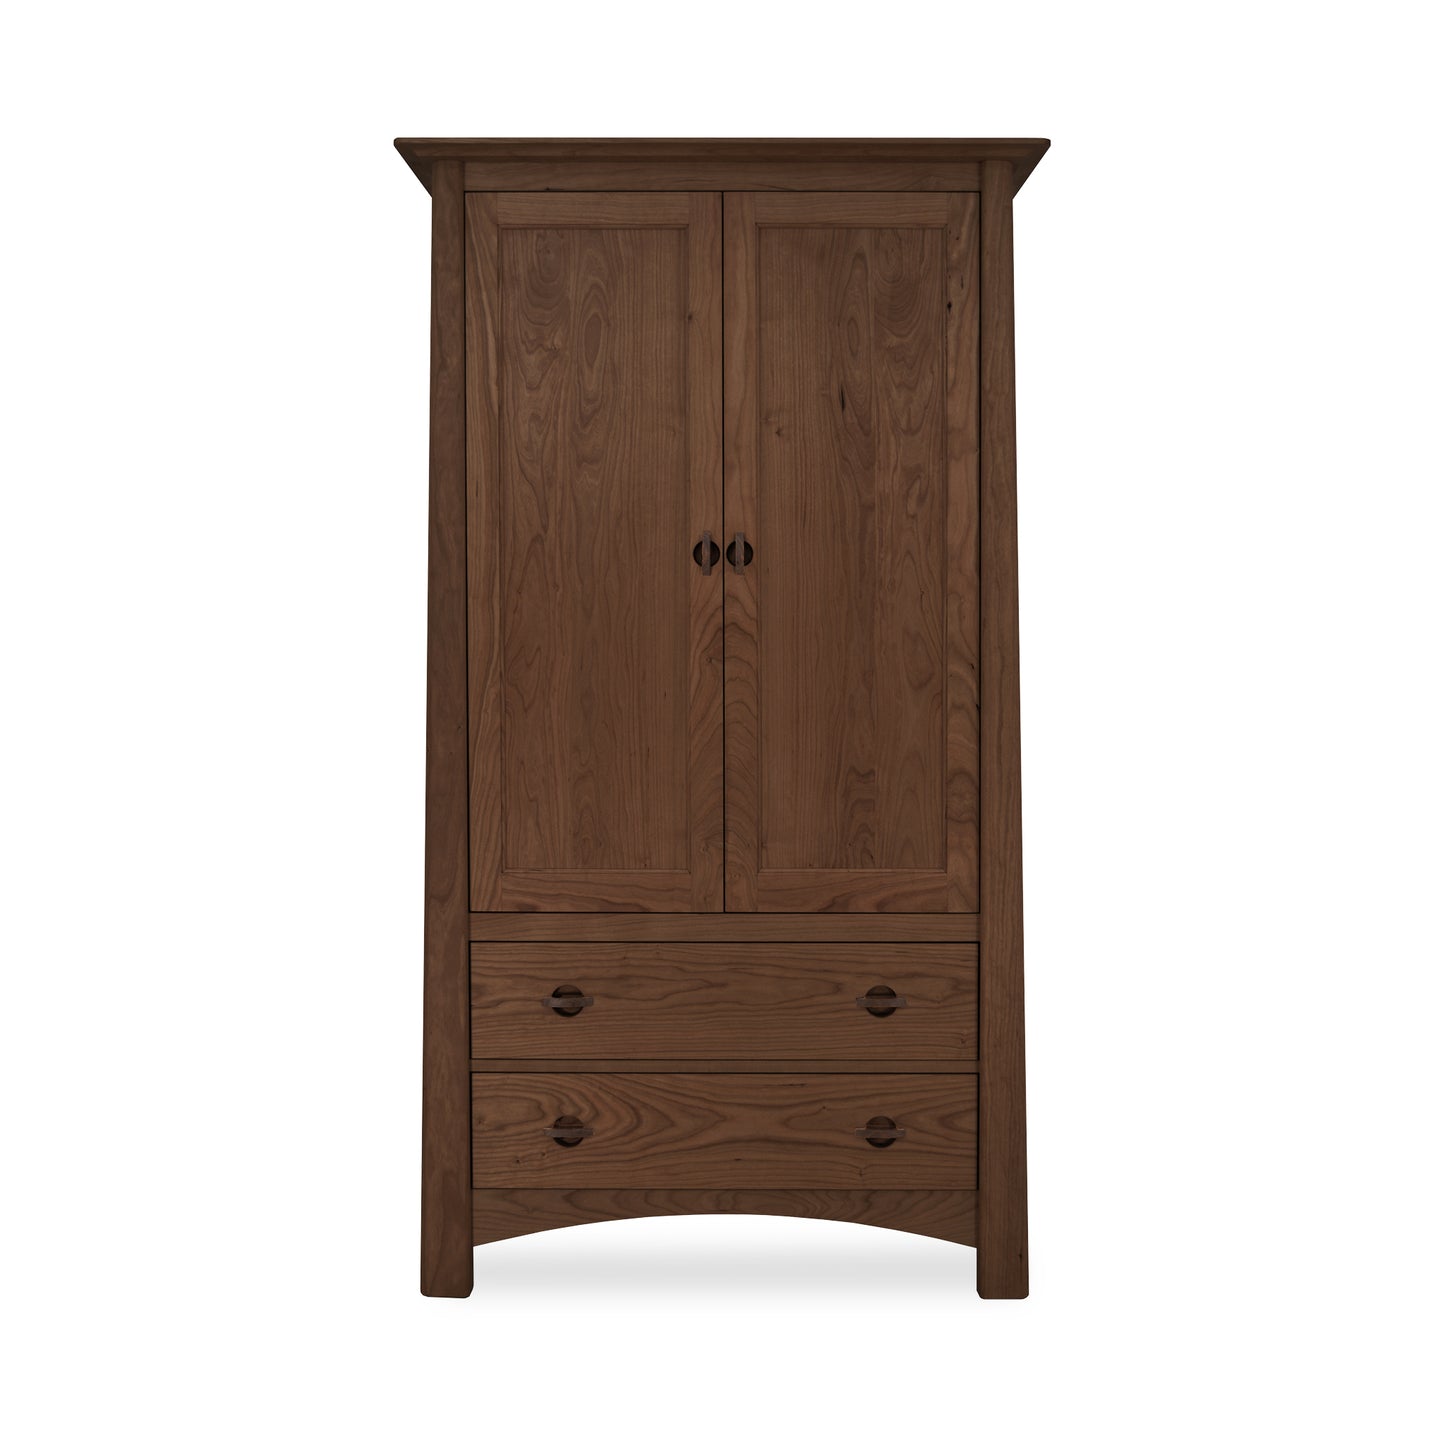 A dark brown Cherry Moon Armoire, showcasing Maple Corner Woodworks craftsmanship, with two doors and a drawer at the bottom, set against a plain white background. The wardrobe features a simple, classic design with rounded handles on the.